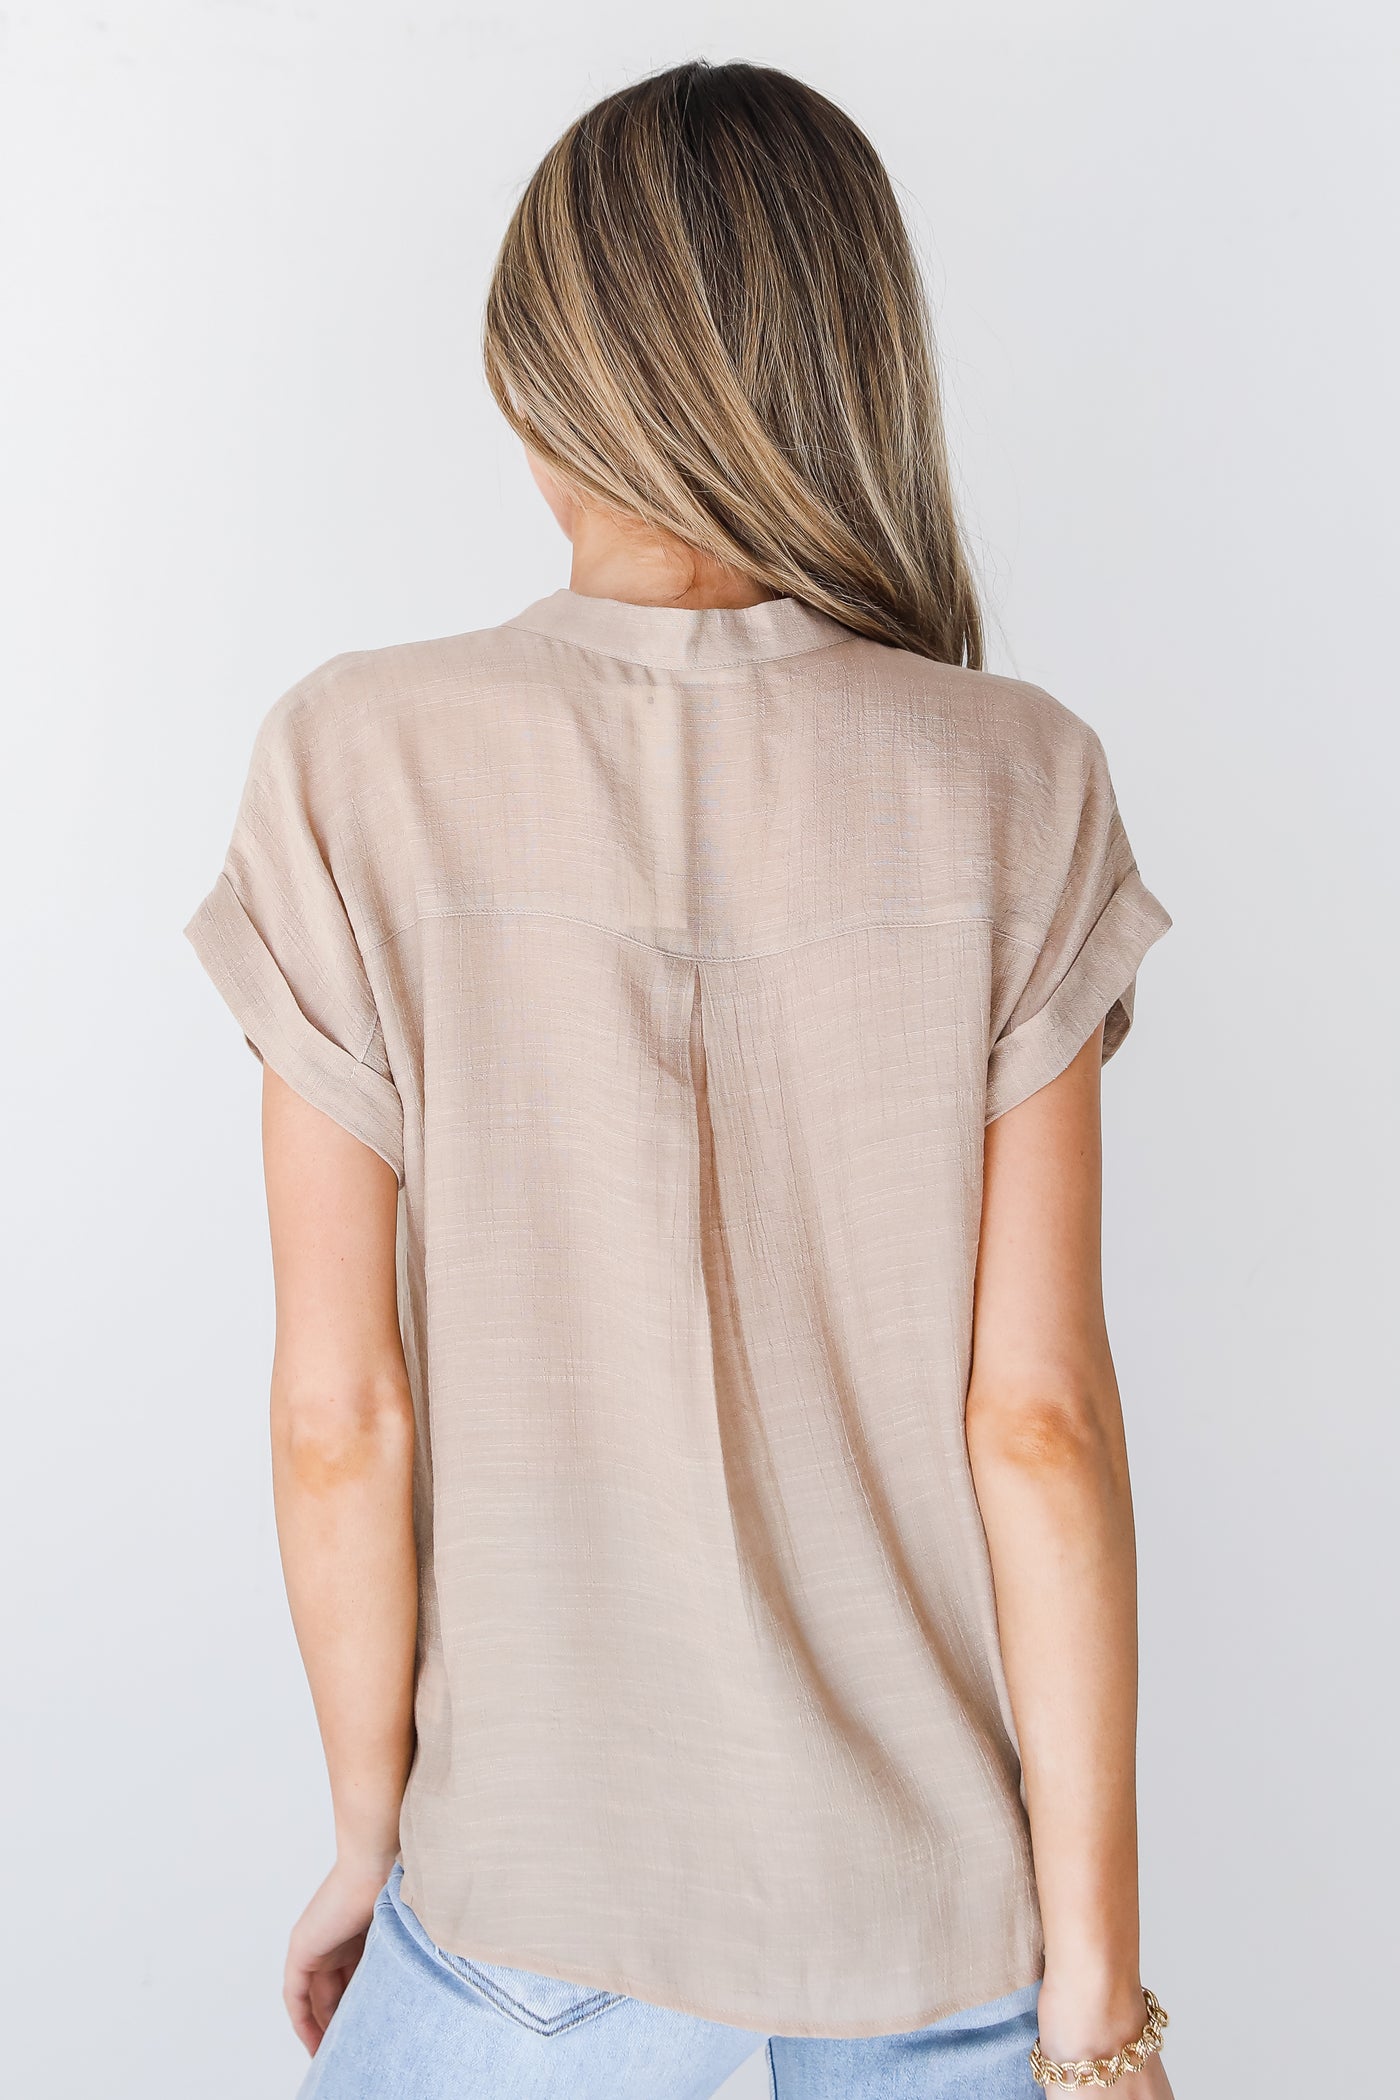 taupe Blouse back view